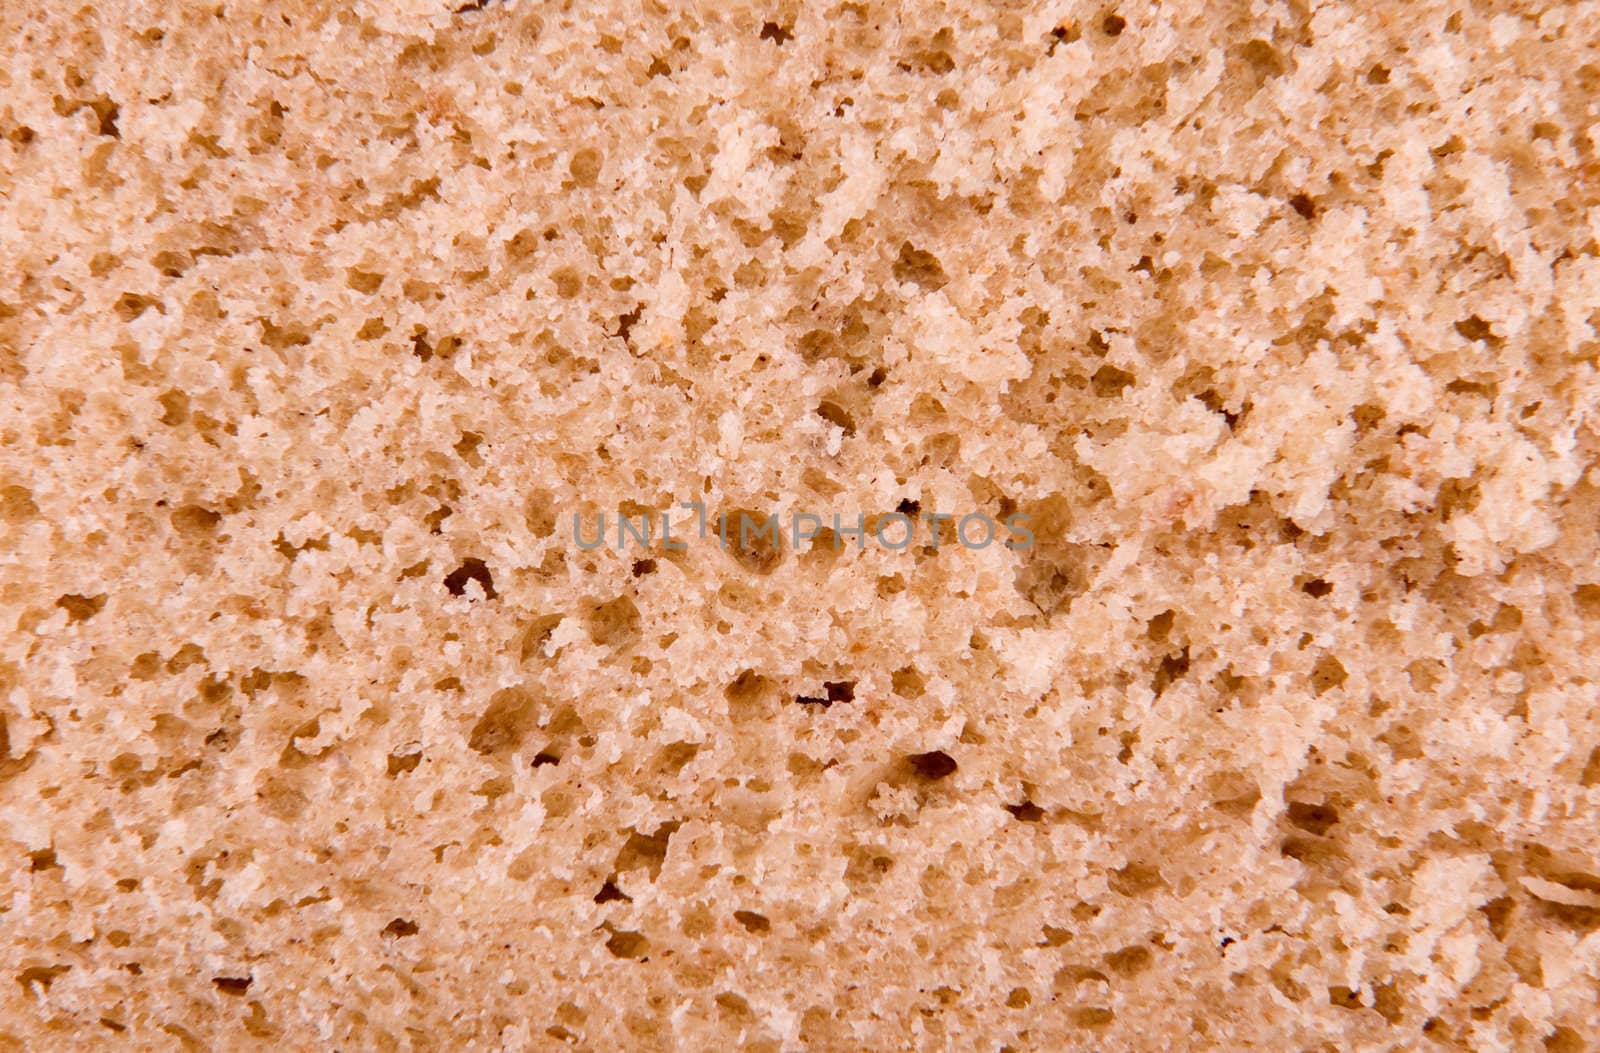 slice of bread take photograph close-up